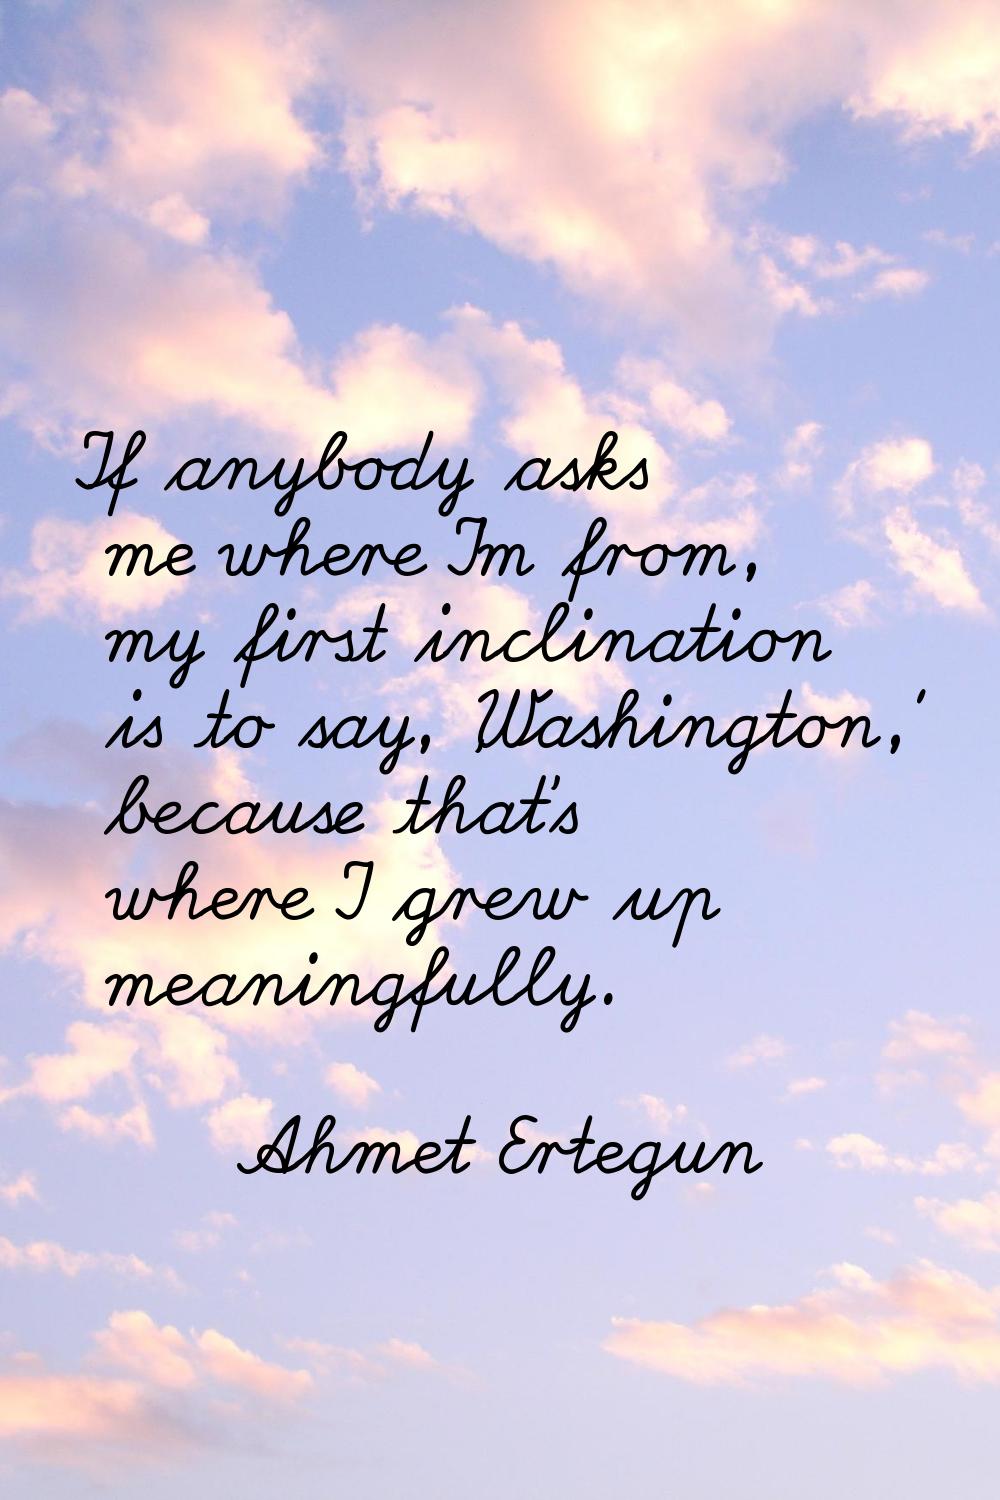 If anybody asks me where I'm from, my first inclination is to say, 'Washington,' because that's whe